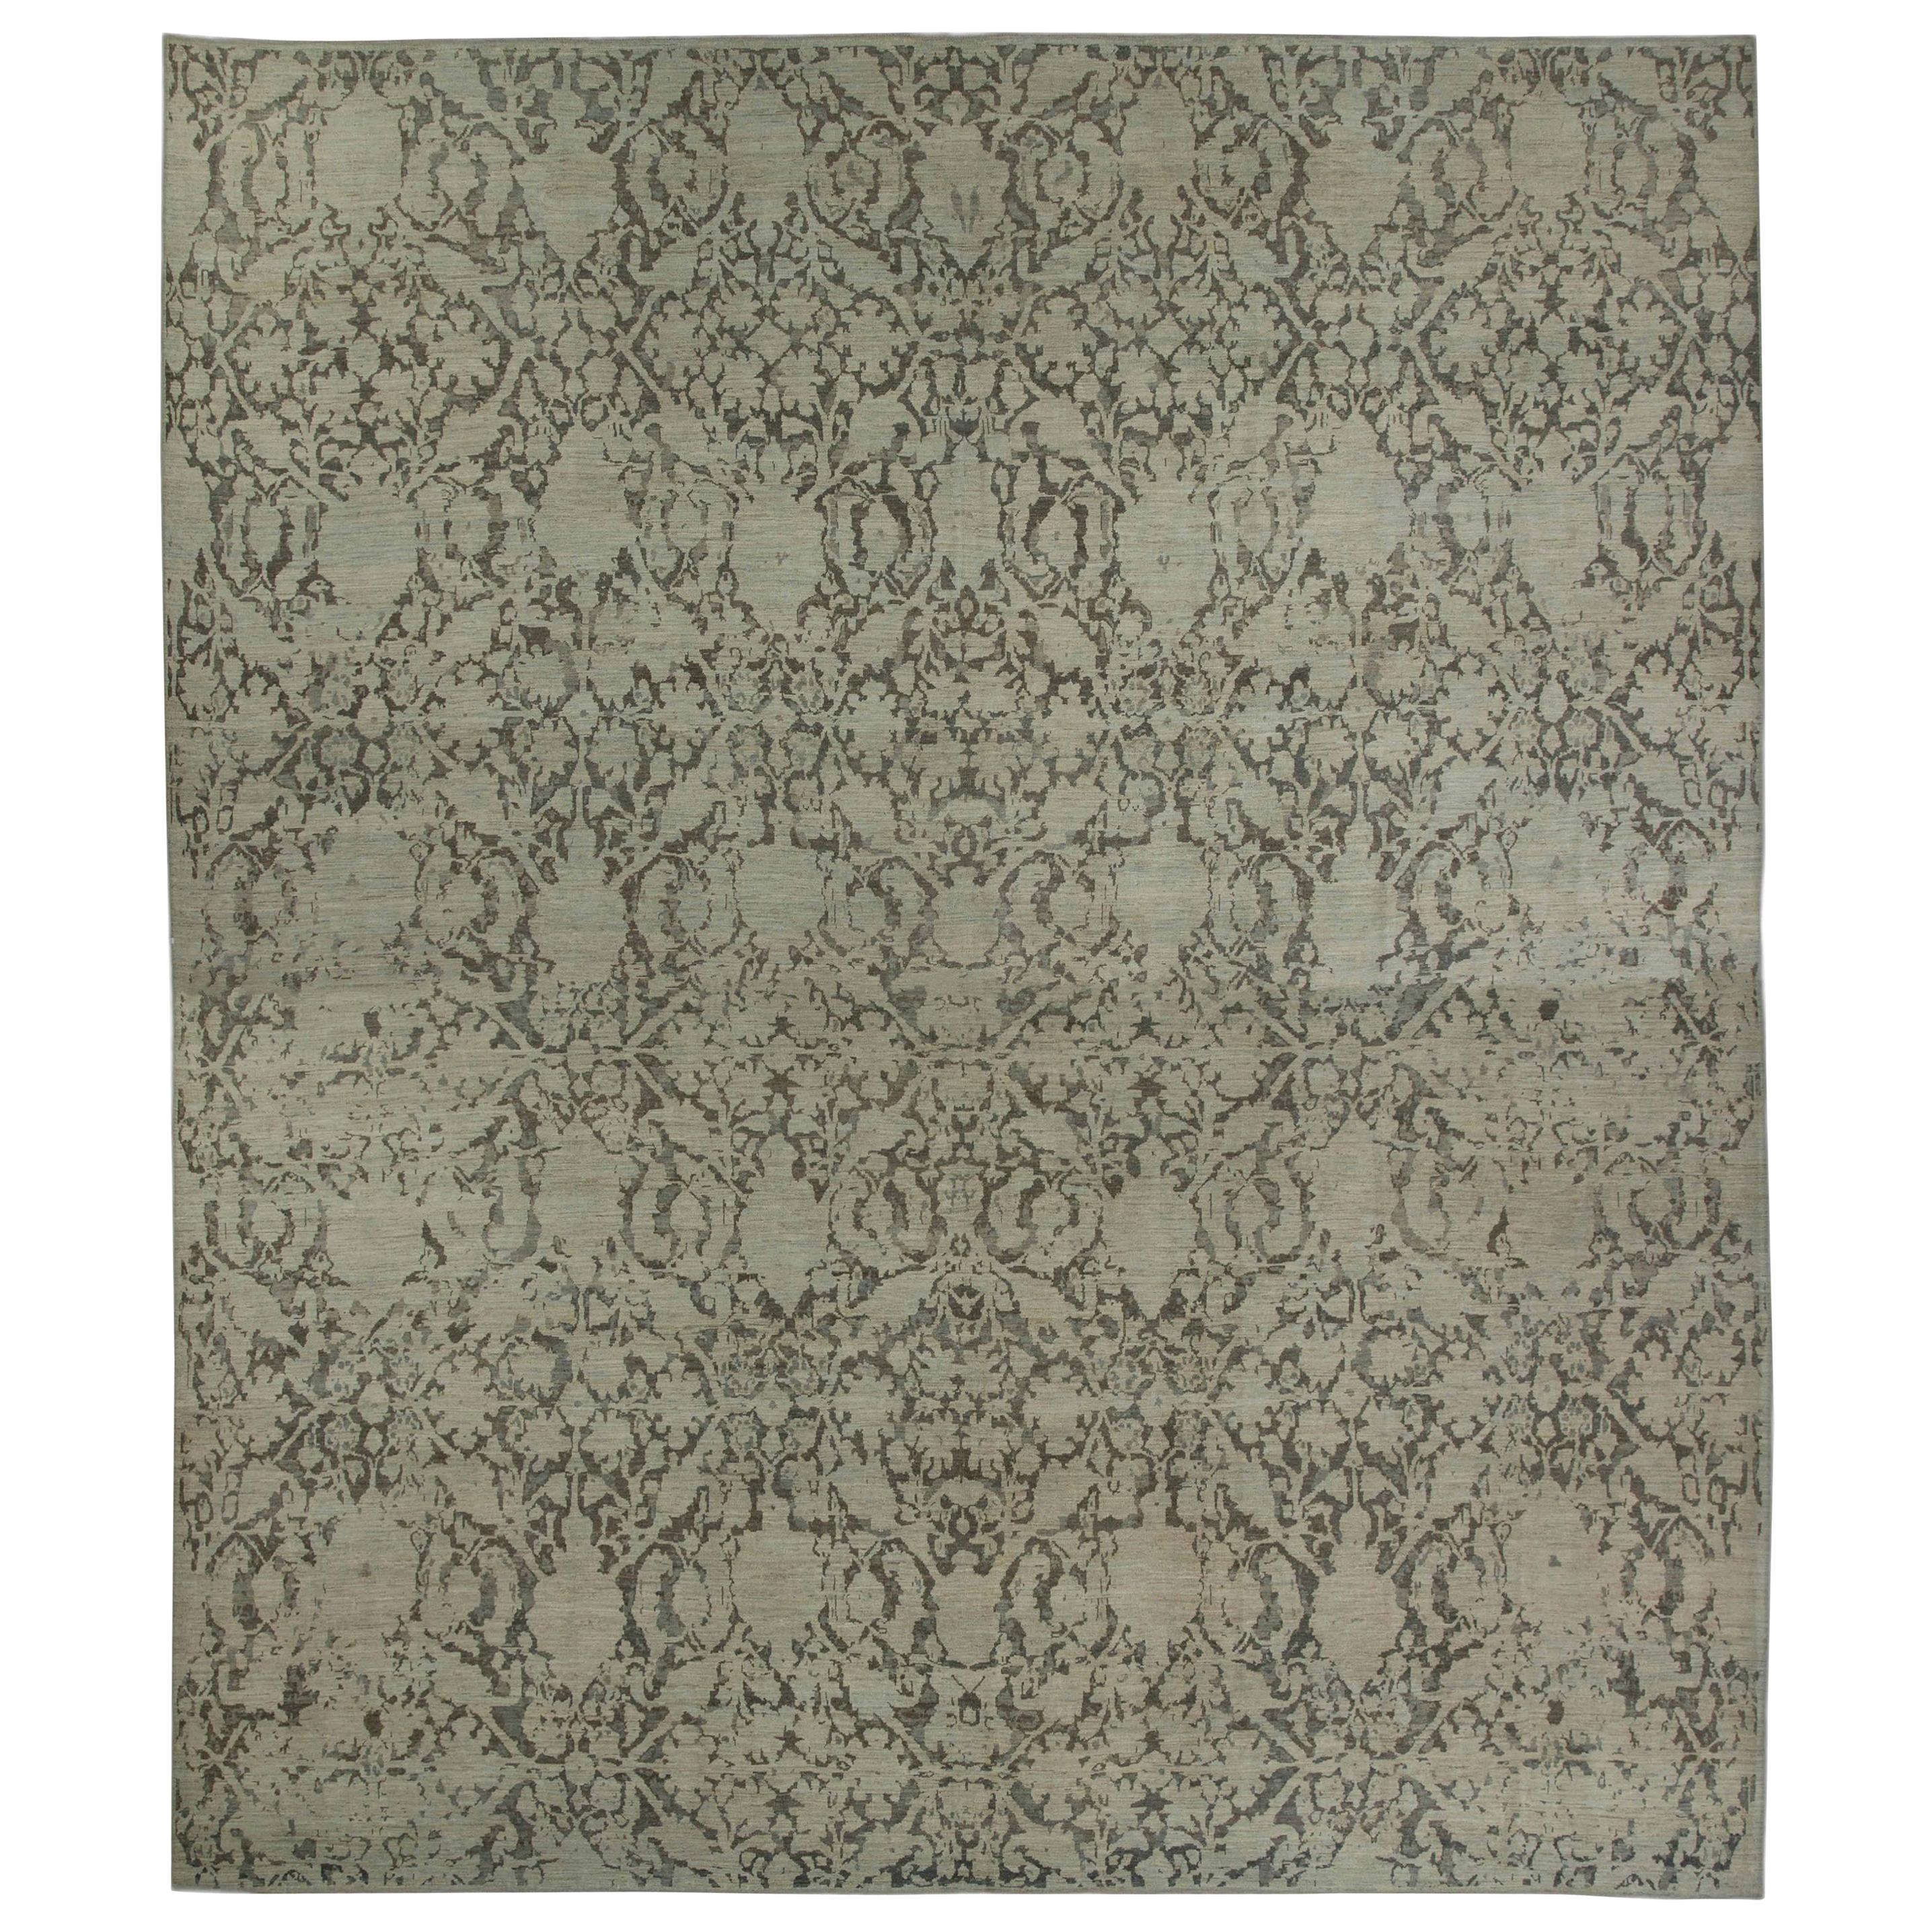 Oversized Turkish Sultanabad Style Rug with Black Floral Details on Beige Field